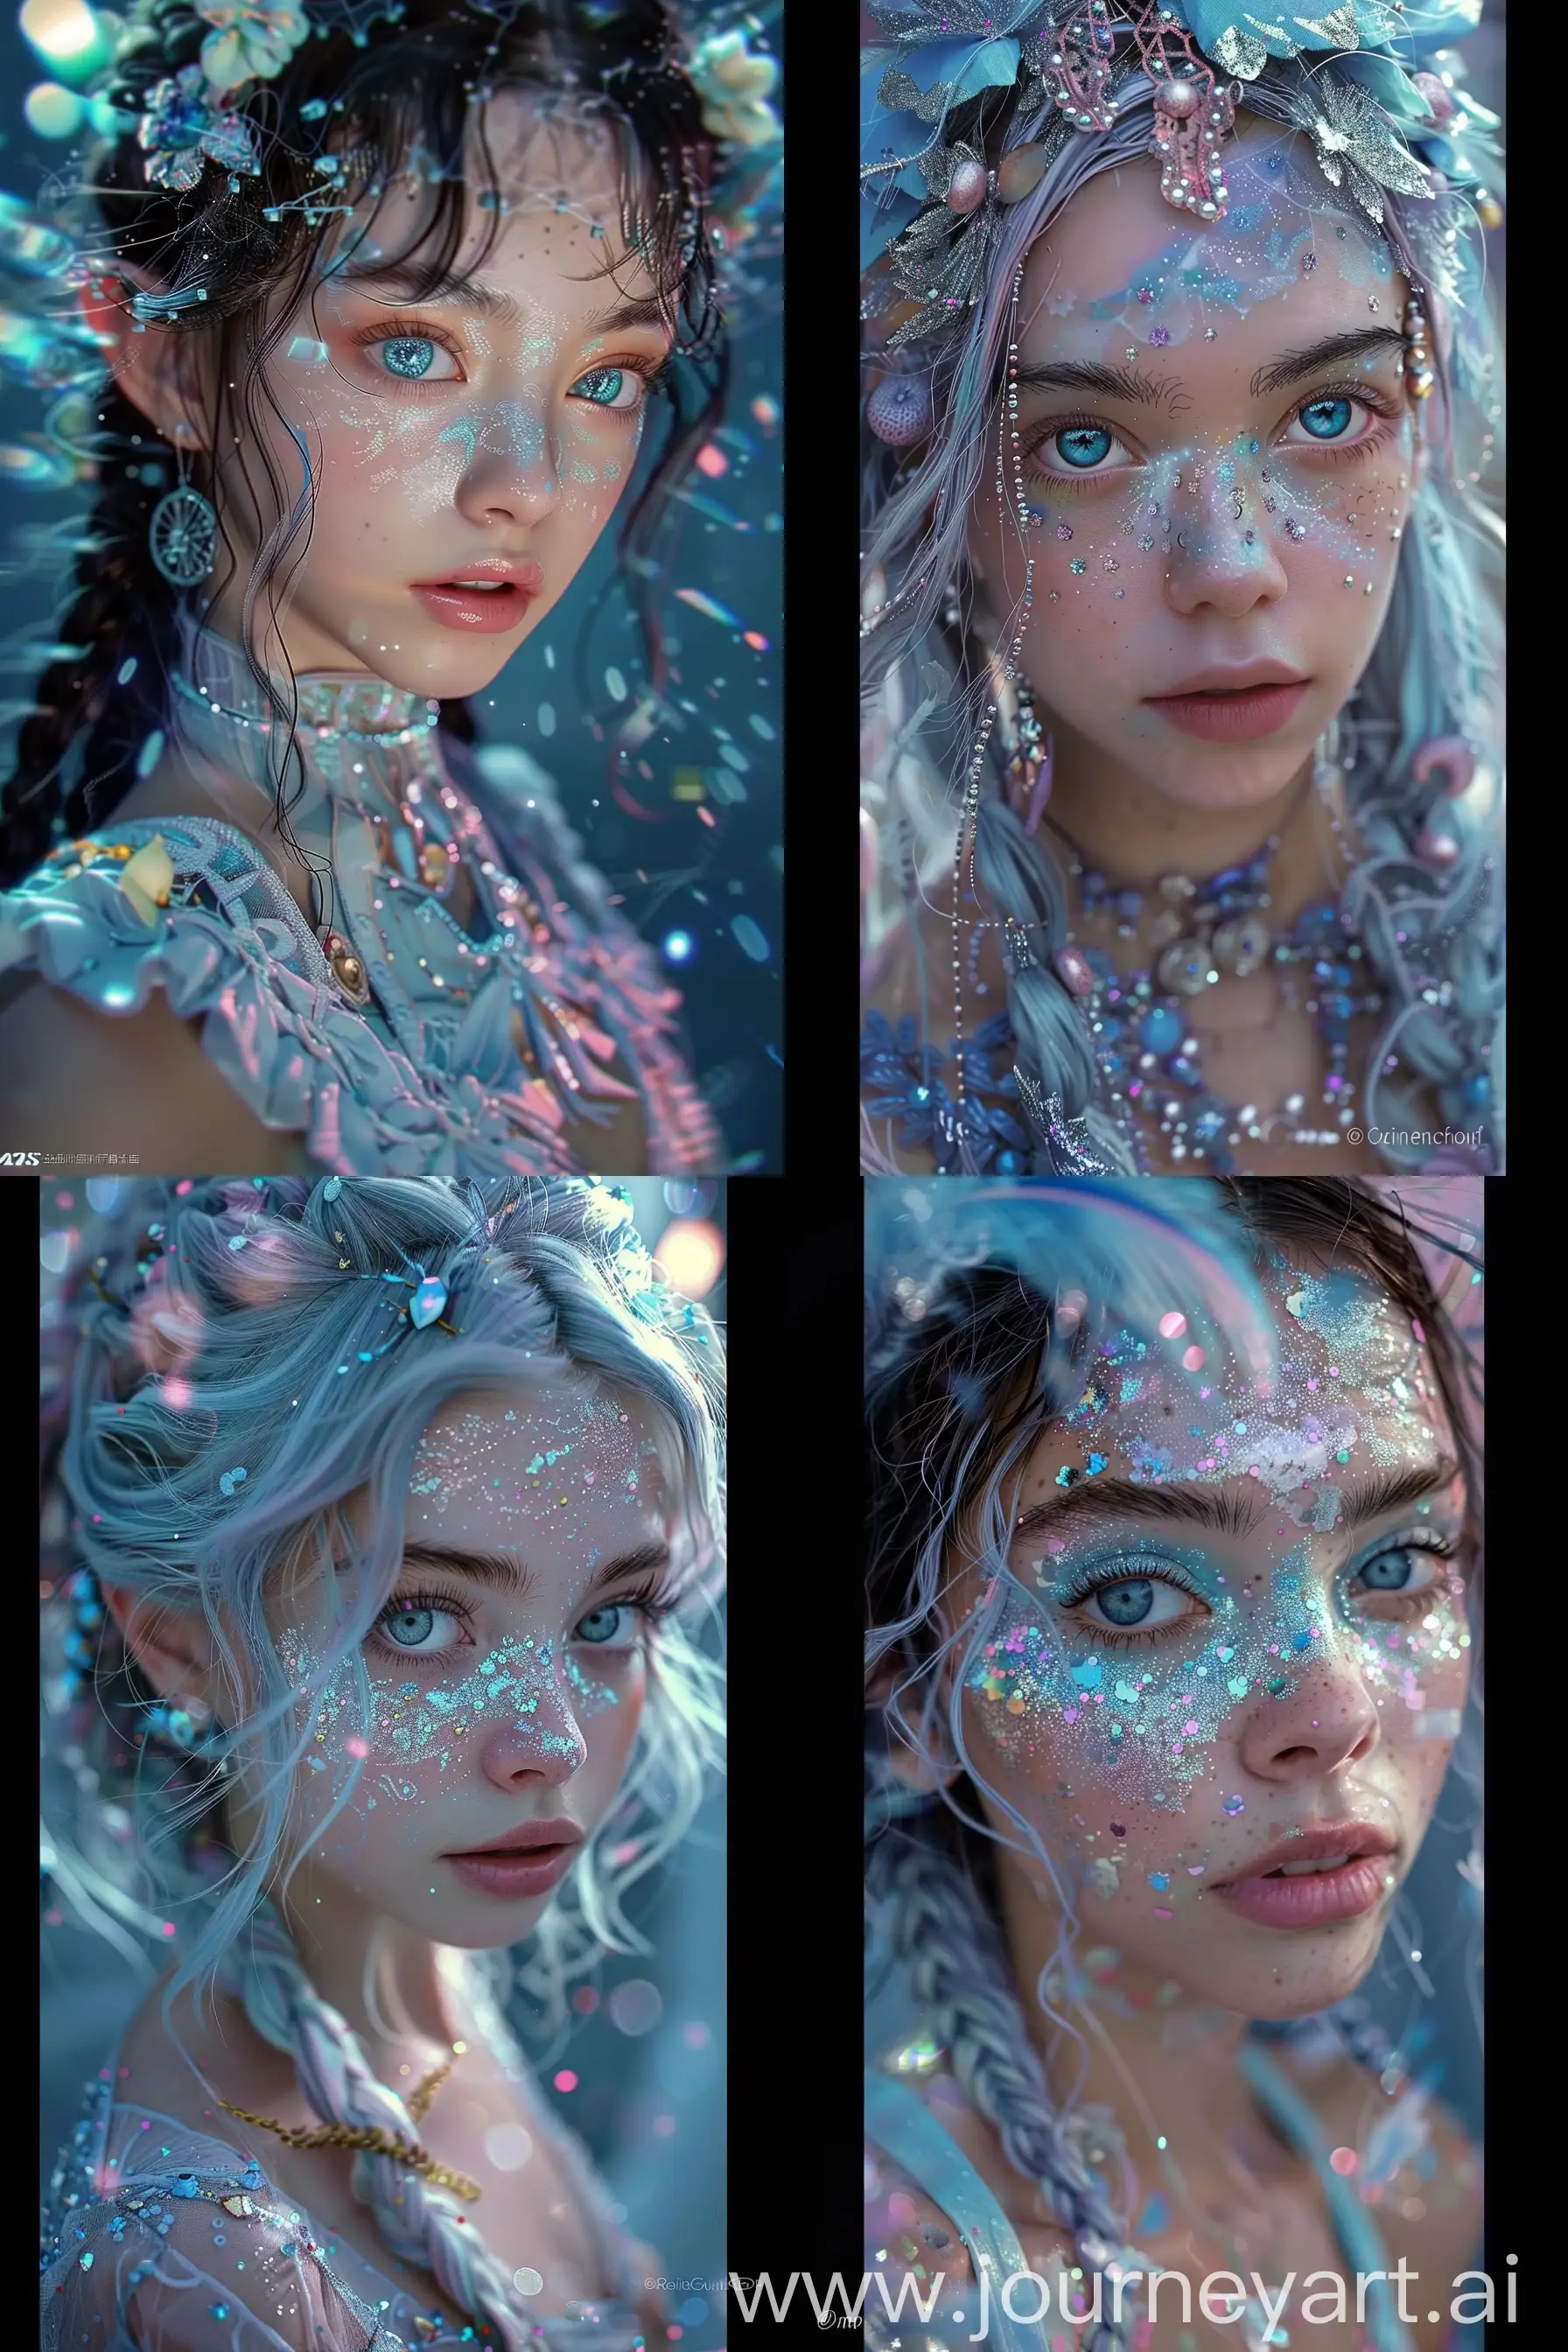 Elfin-CyberFantasy-Portrait-of-a-Young-Woman-with-Ethereal-Makeup-and-Holographic-Hair